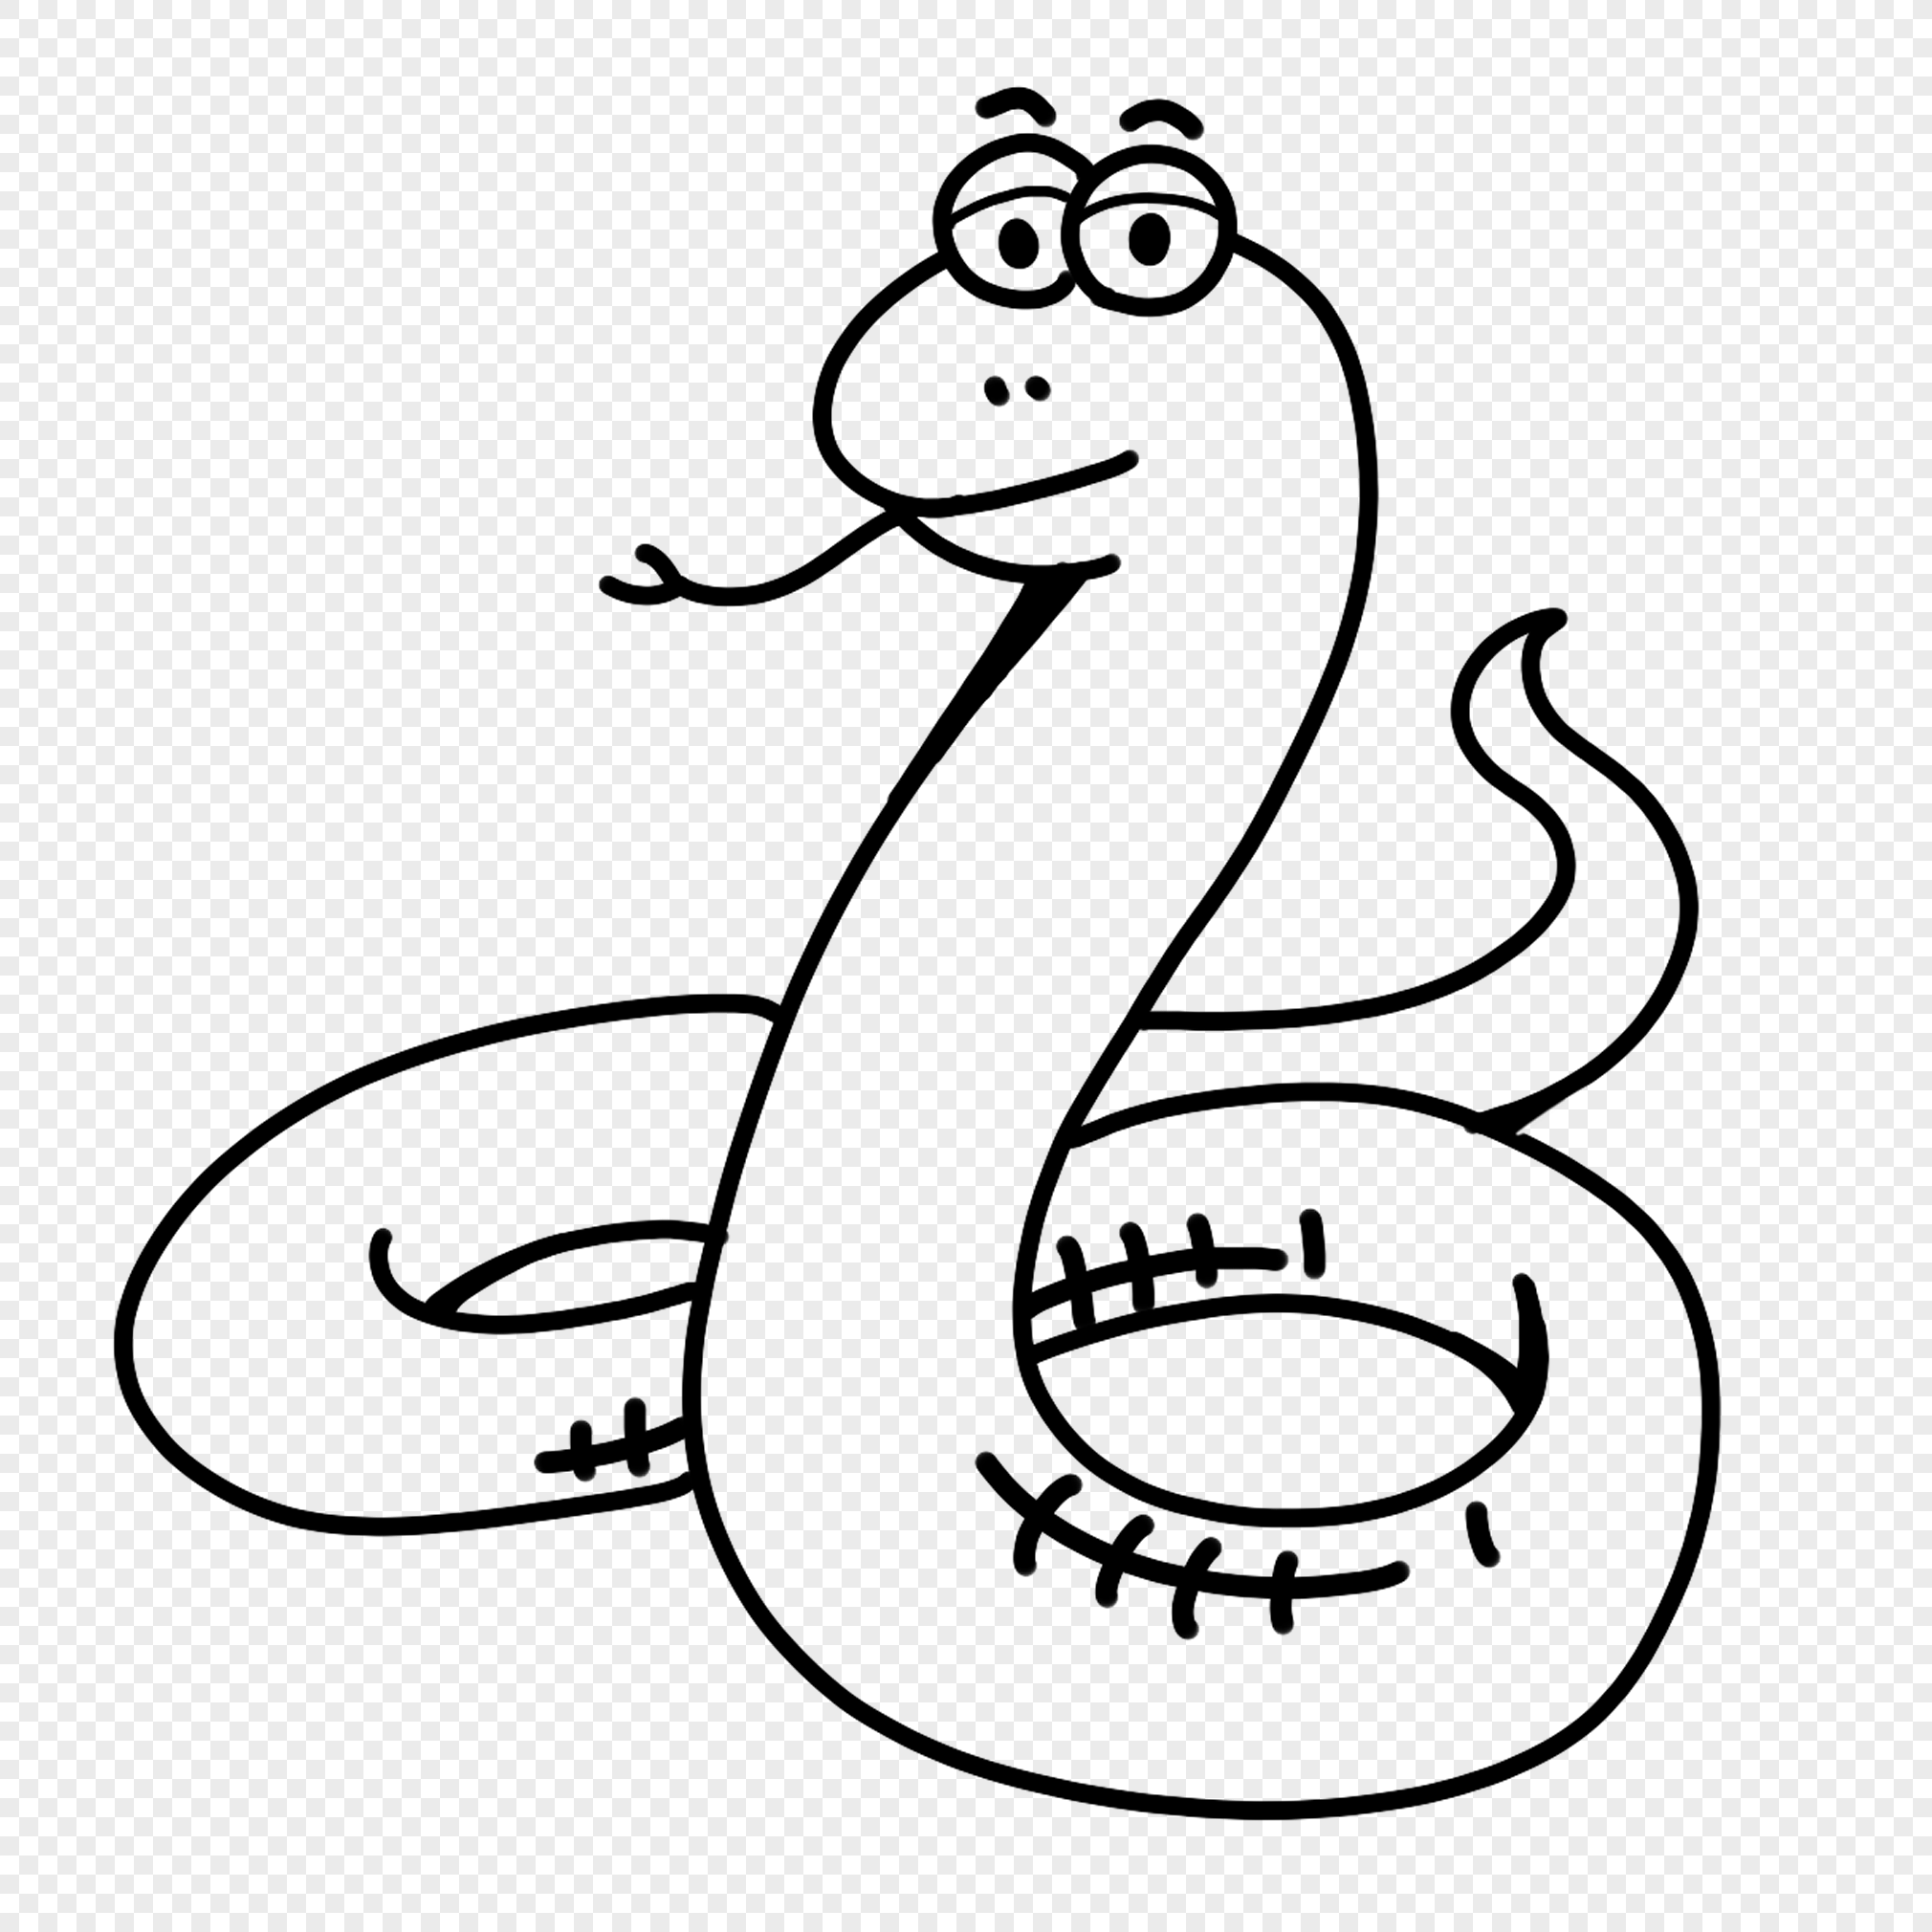 Intertwined Snake Drawing High-Res Vector Graphic - Getty Images